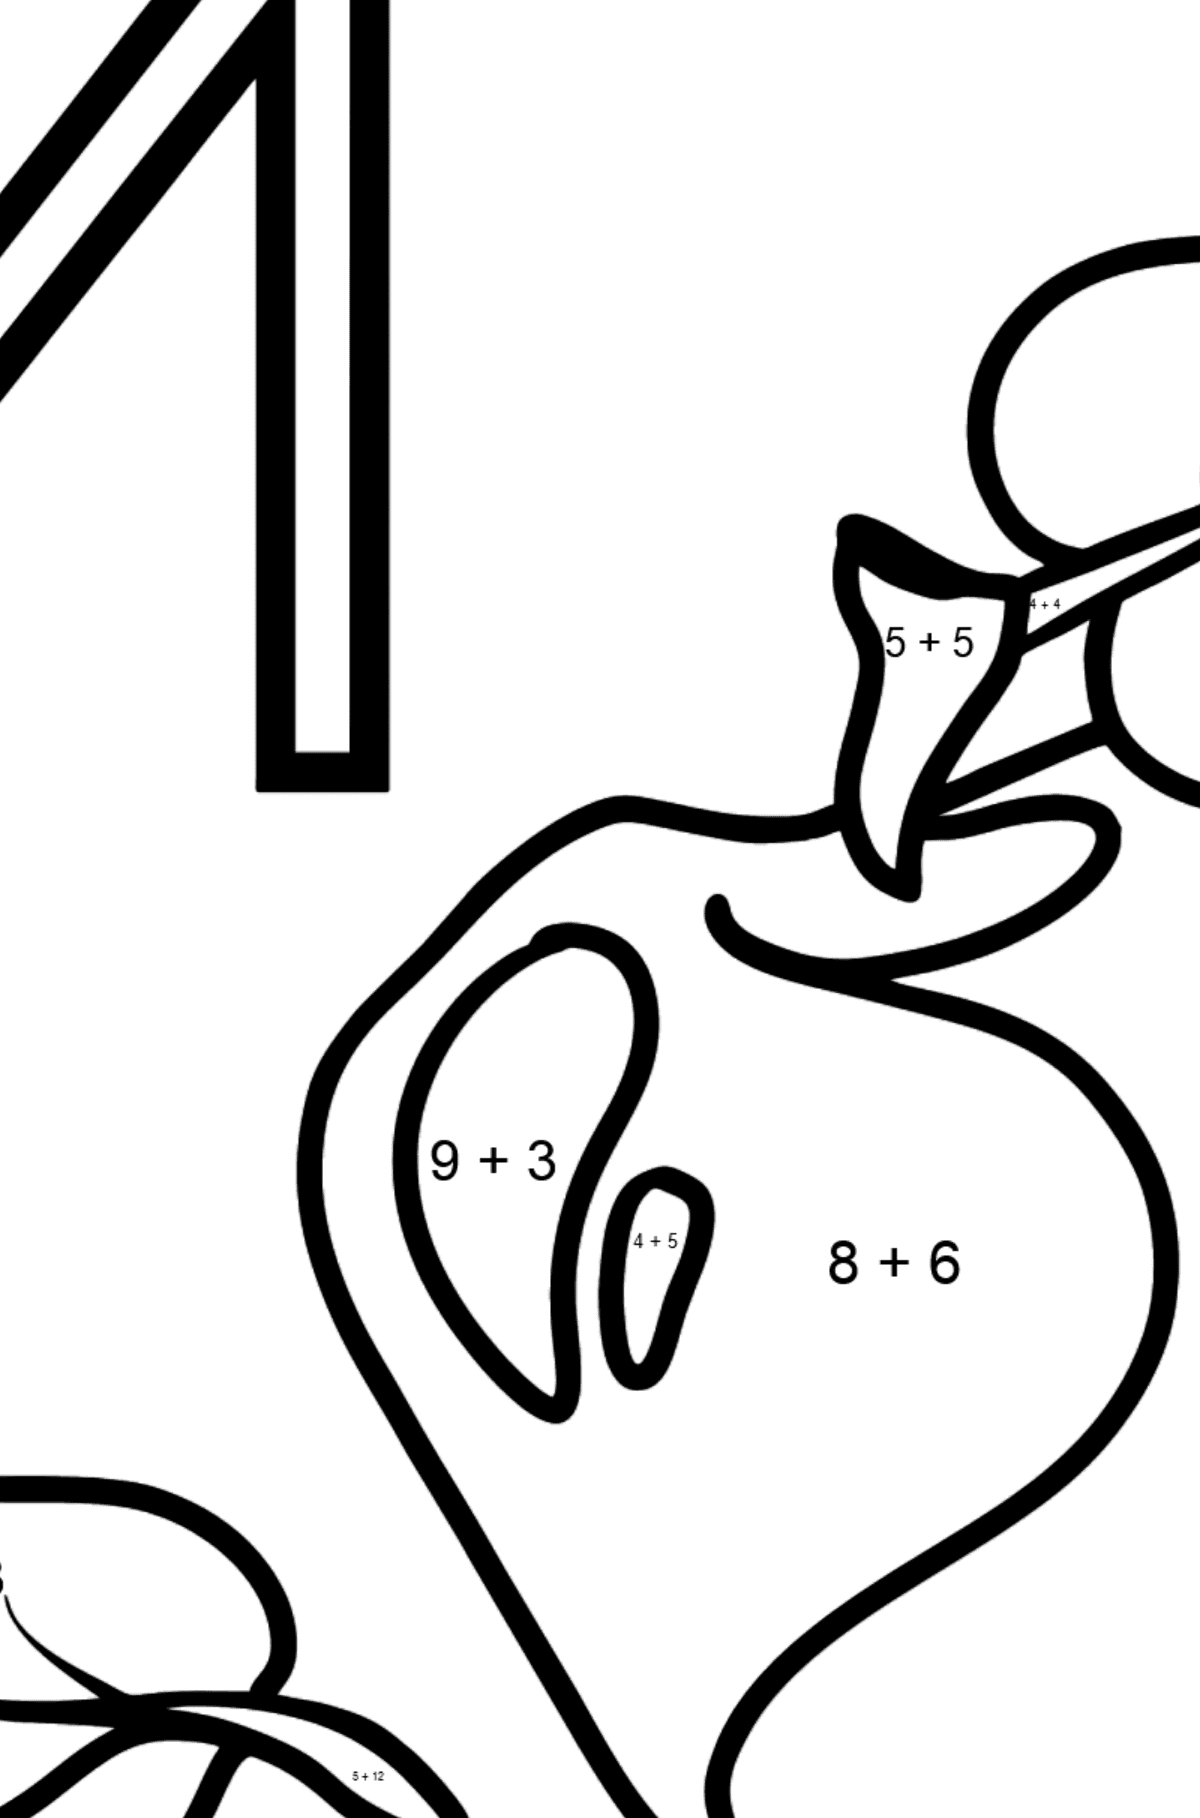 Spanish Letter M coloring pages - MANZANA - Math Coloring - Addition for Kids